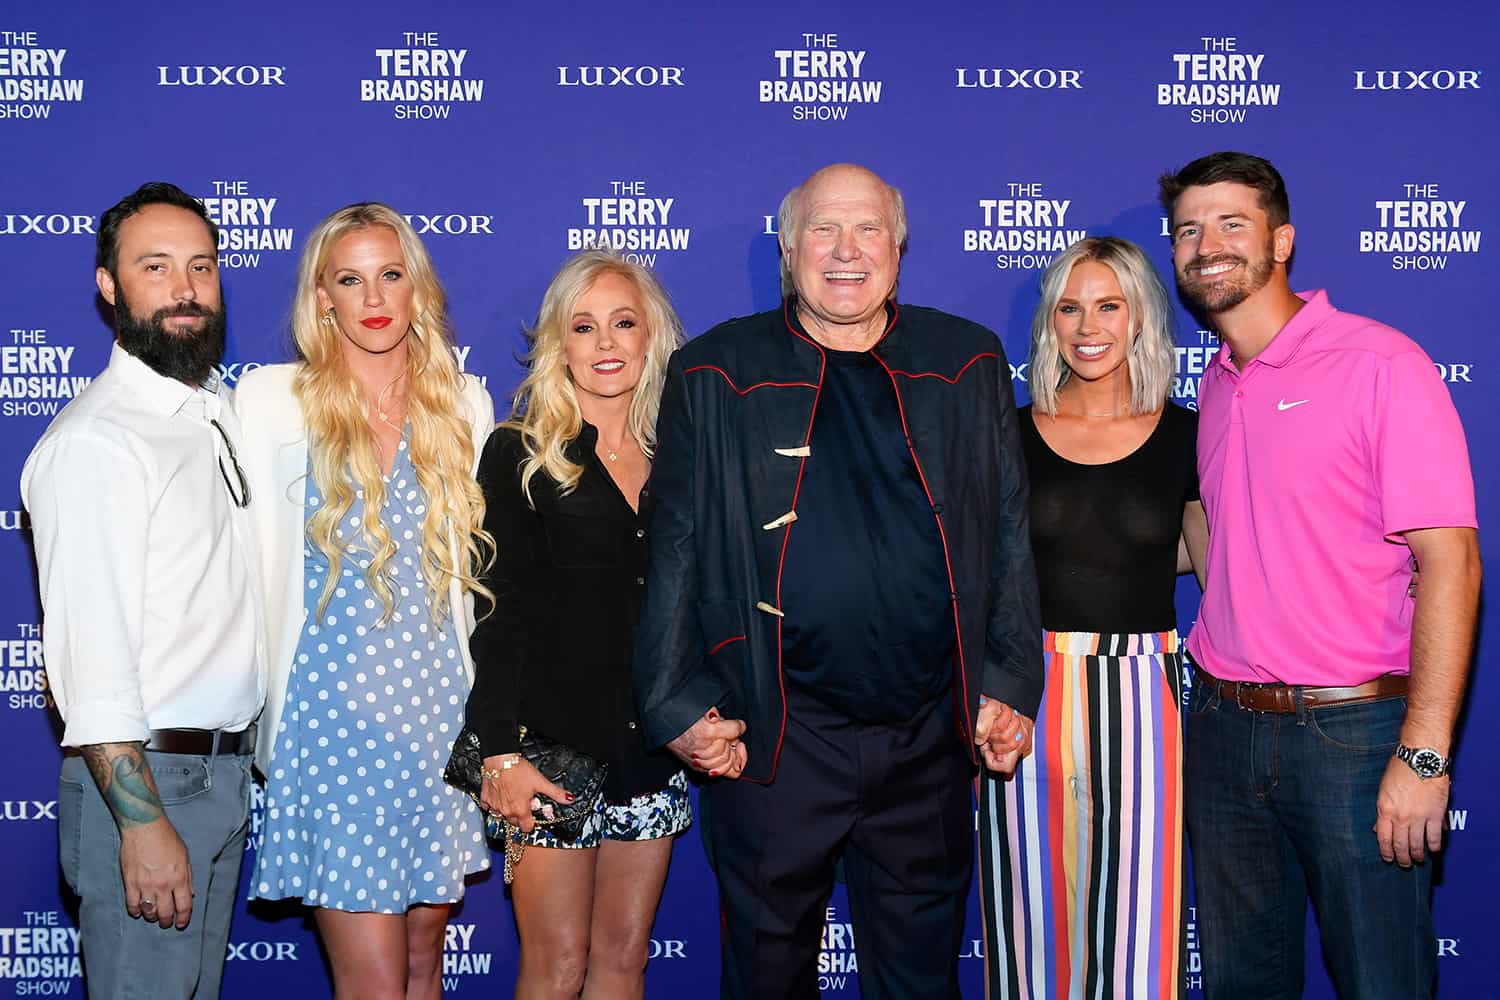 The Terry Bradshaw Show Premieres at Luxor Hotel and Casino in Las Vegas